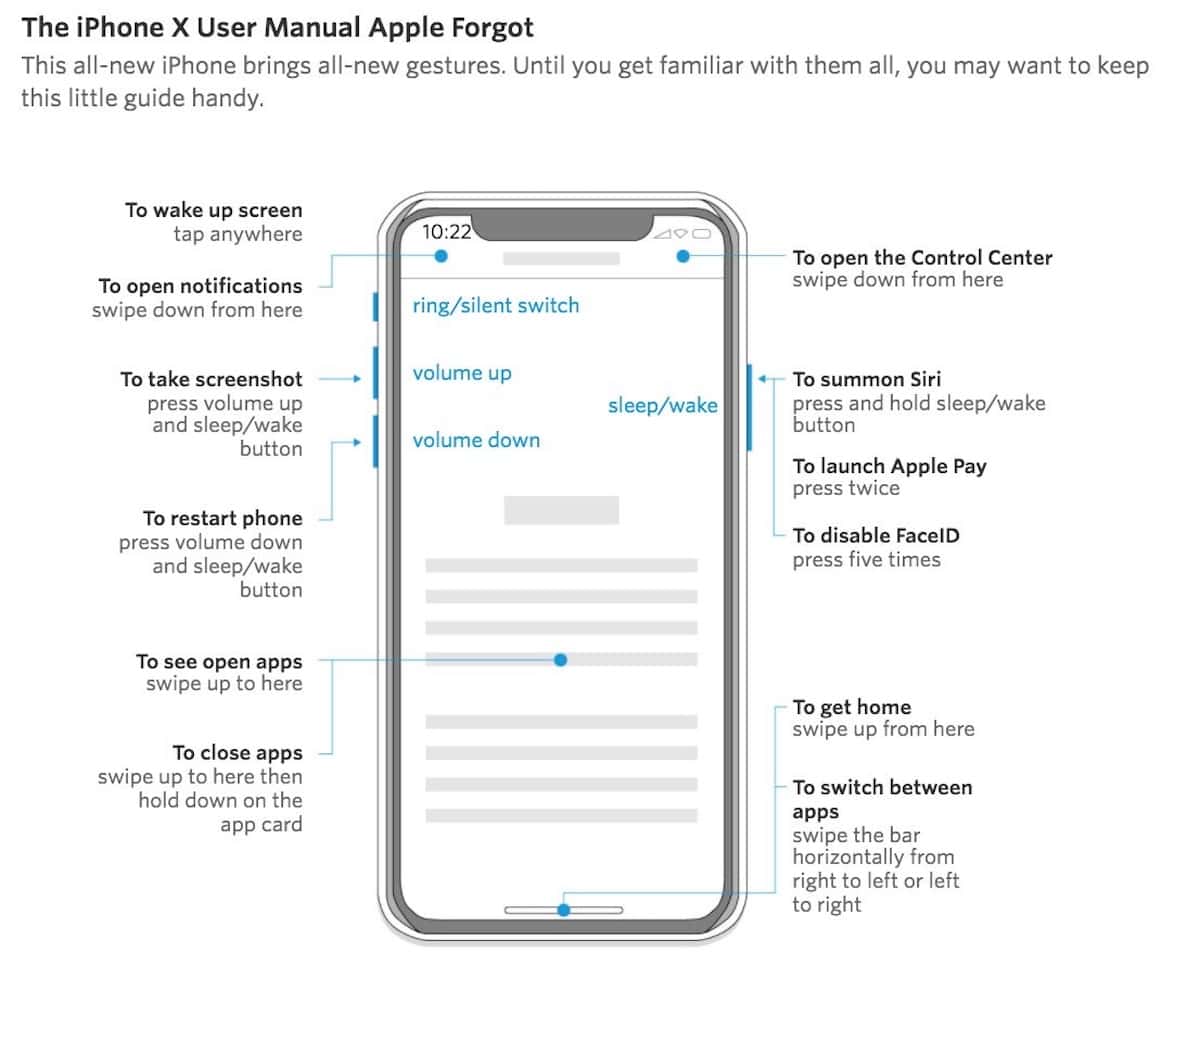 Image of unofficial iPhone X manual that shows all the controls.